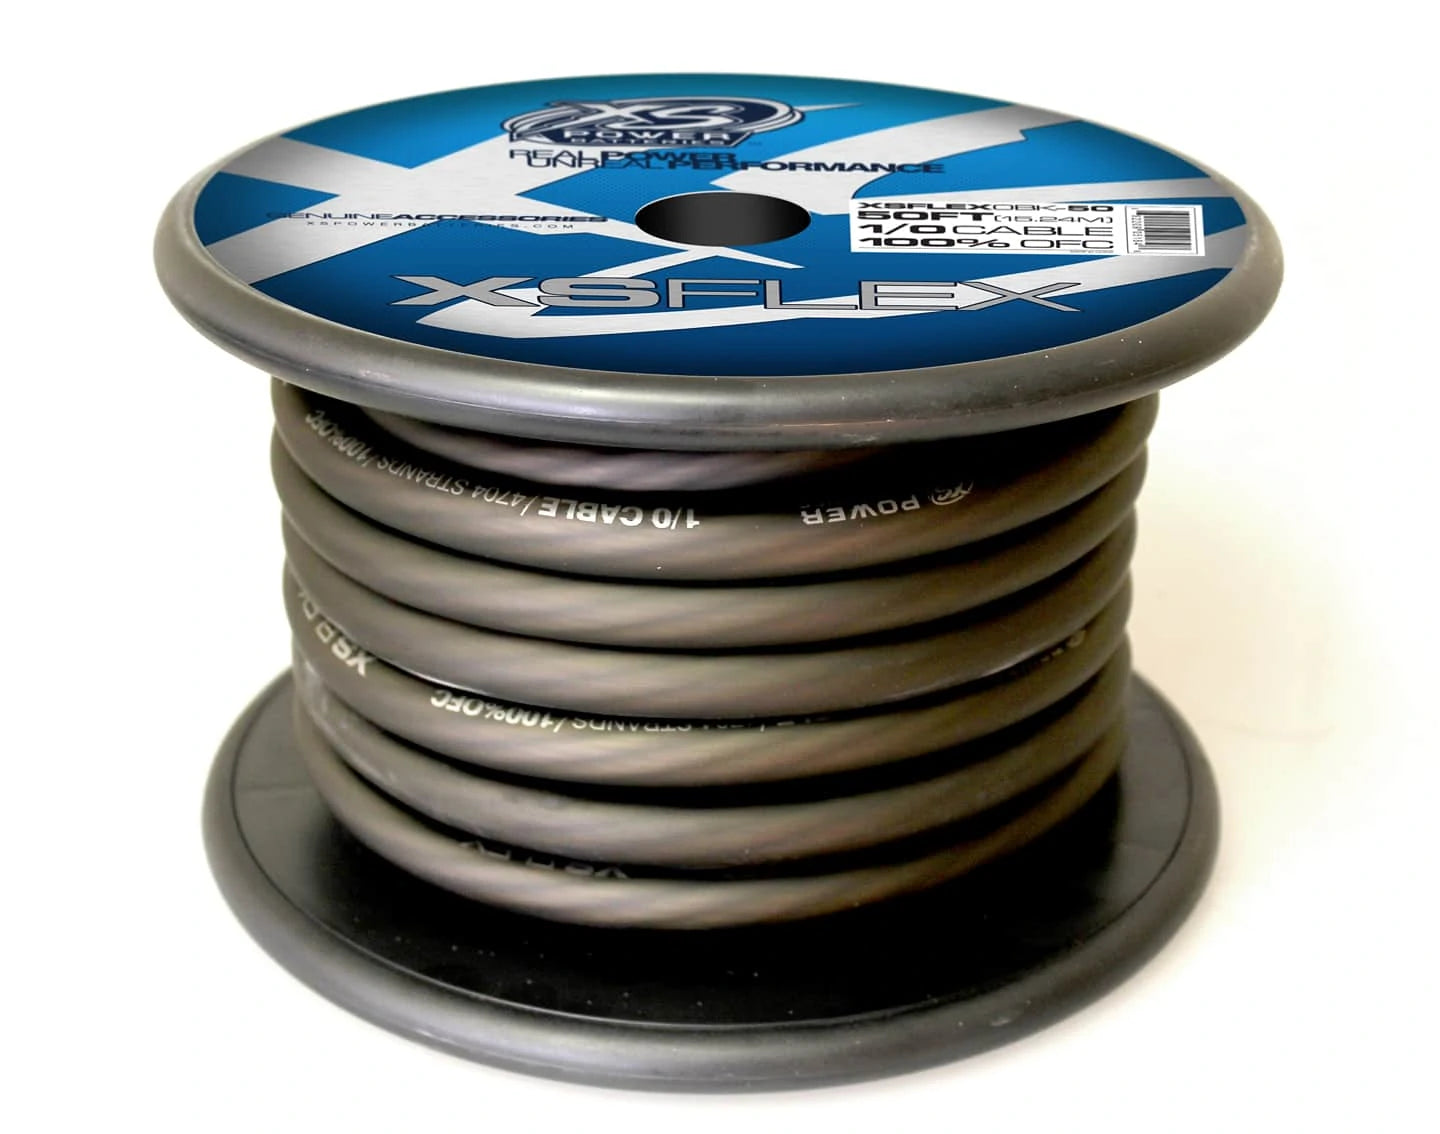 XS Power 1/0 AWG Gauge XS Flex 100% Oxygen Free Tinned Copper Power and Ground Cable 50ft Spool Electrical Wire